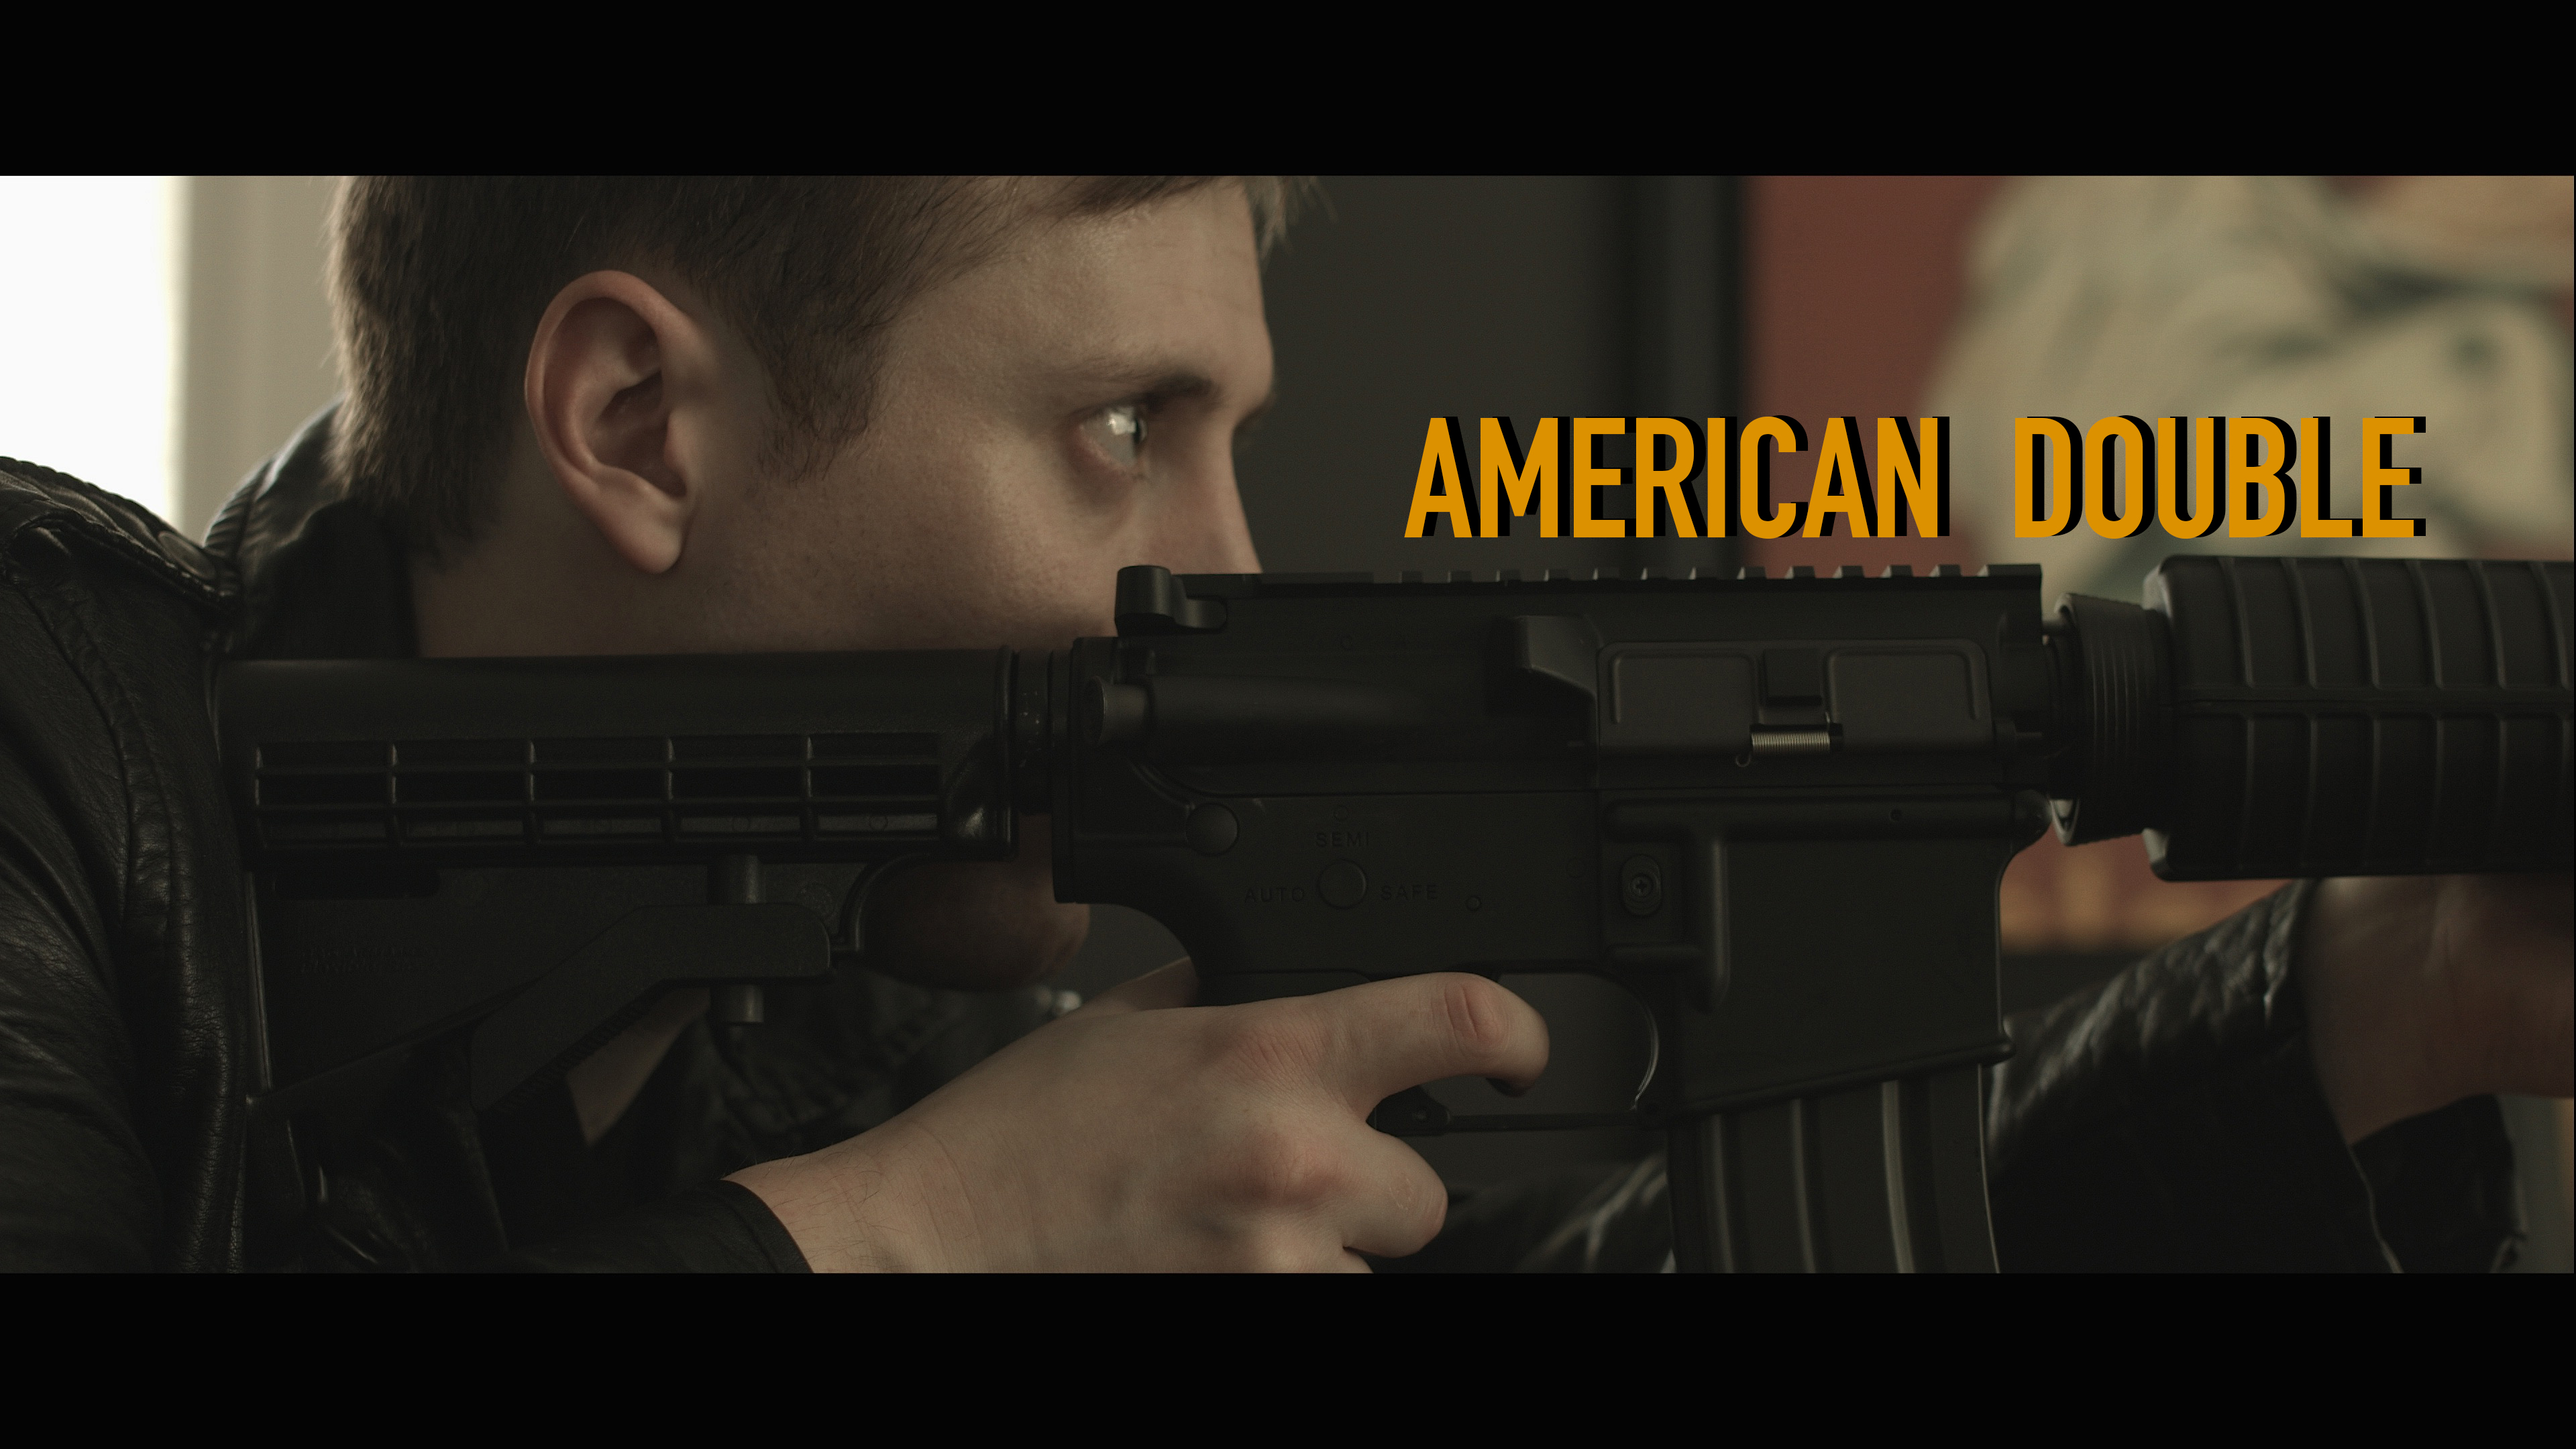 American Double (Feature Film) Directed by Matteo Saradini Kristian Messere as 